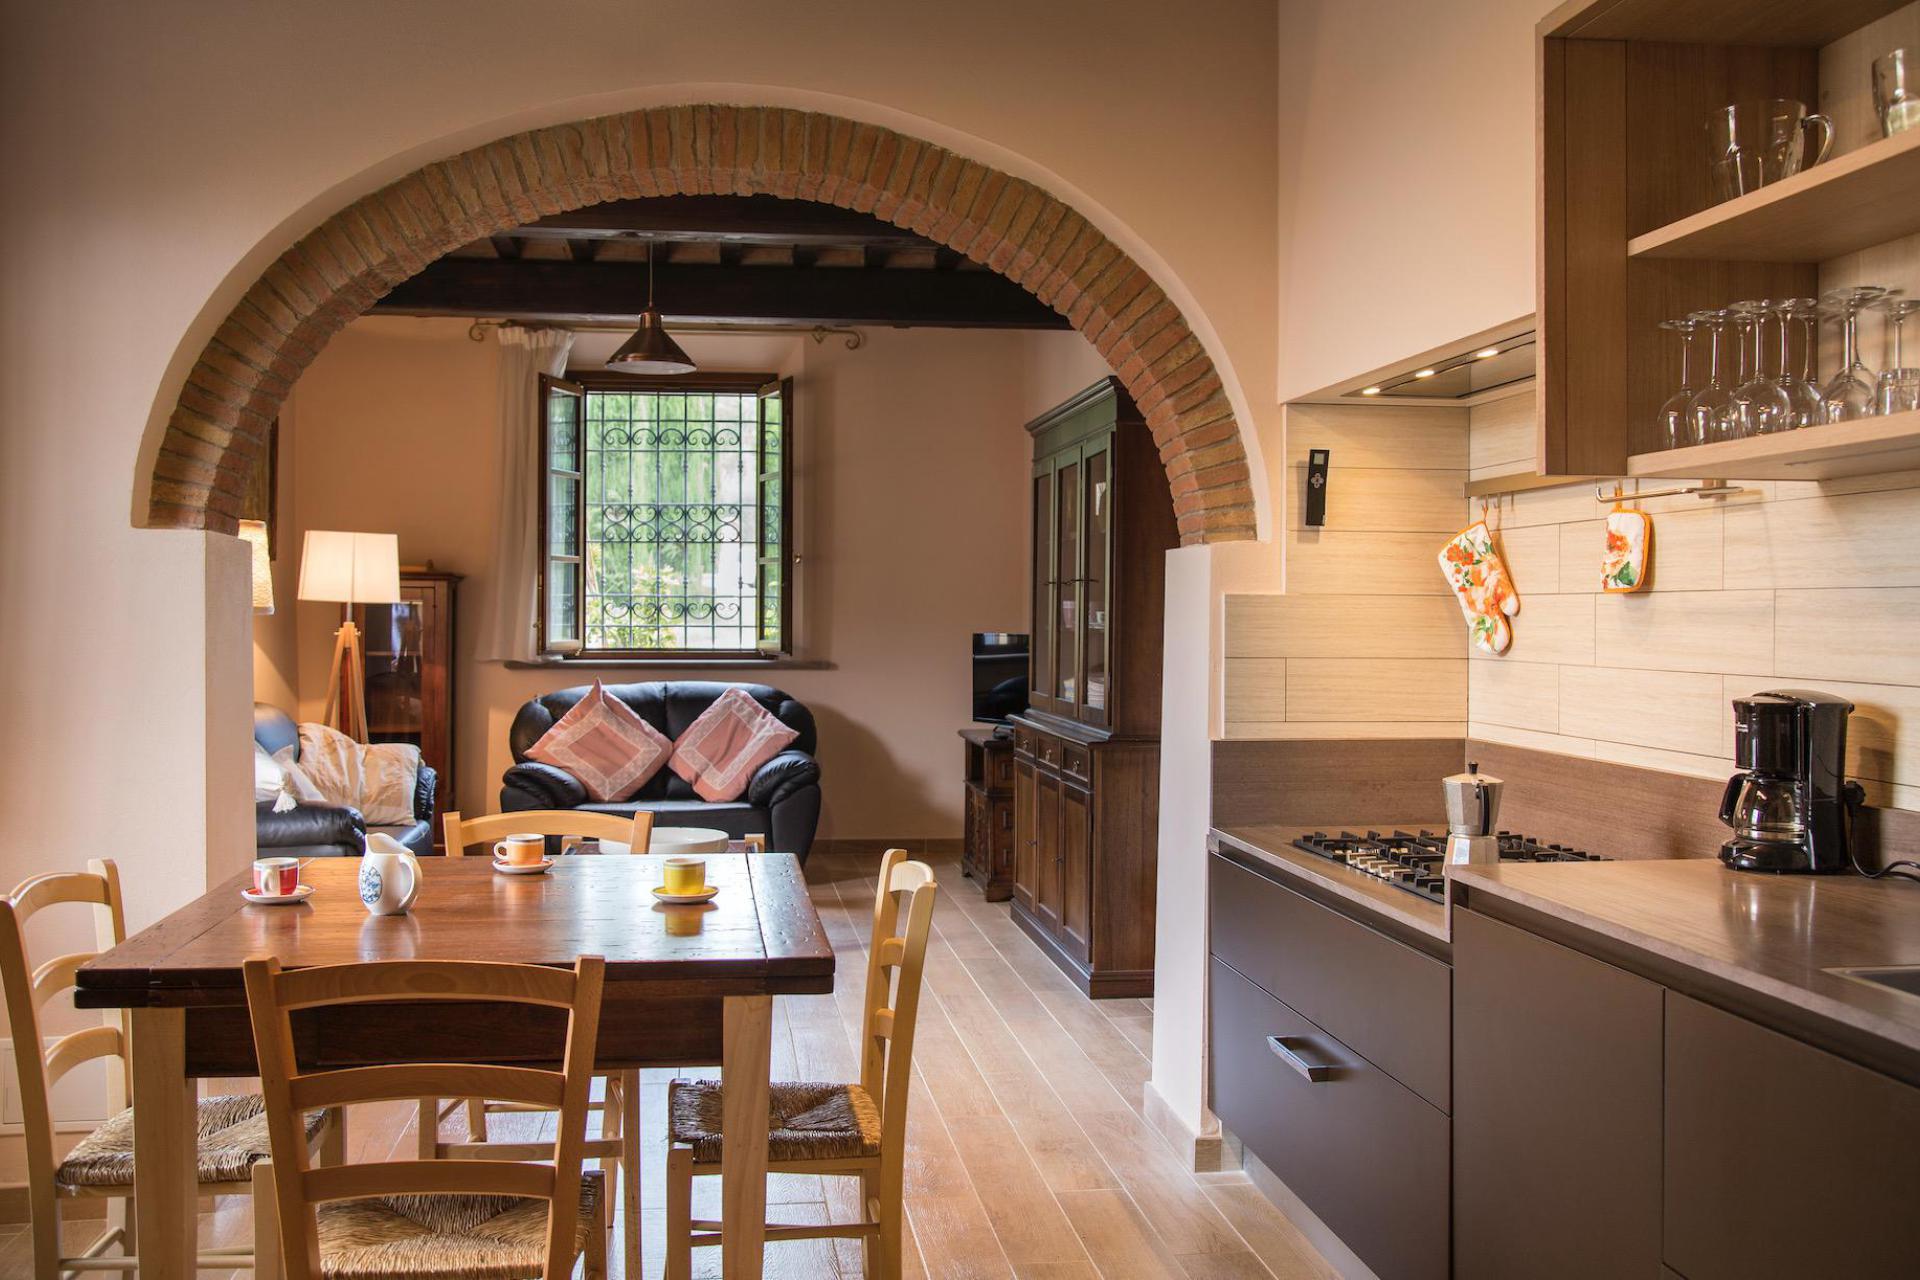 Agriturismo Tuscany Agriturismo with wine cellar in the heart of Tuscany